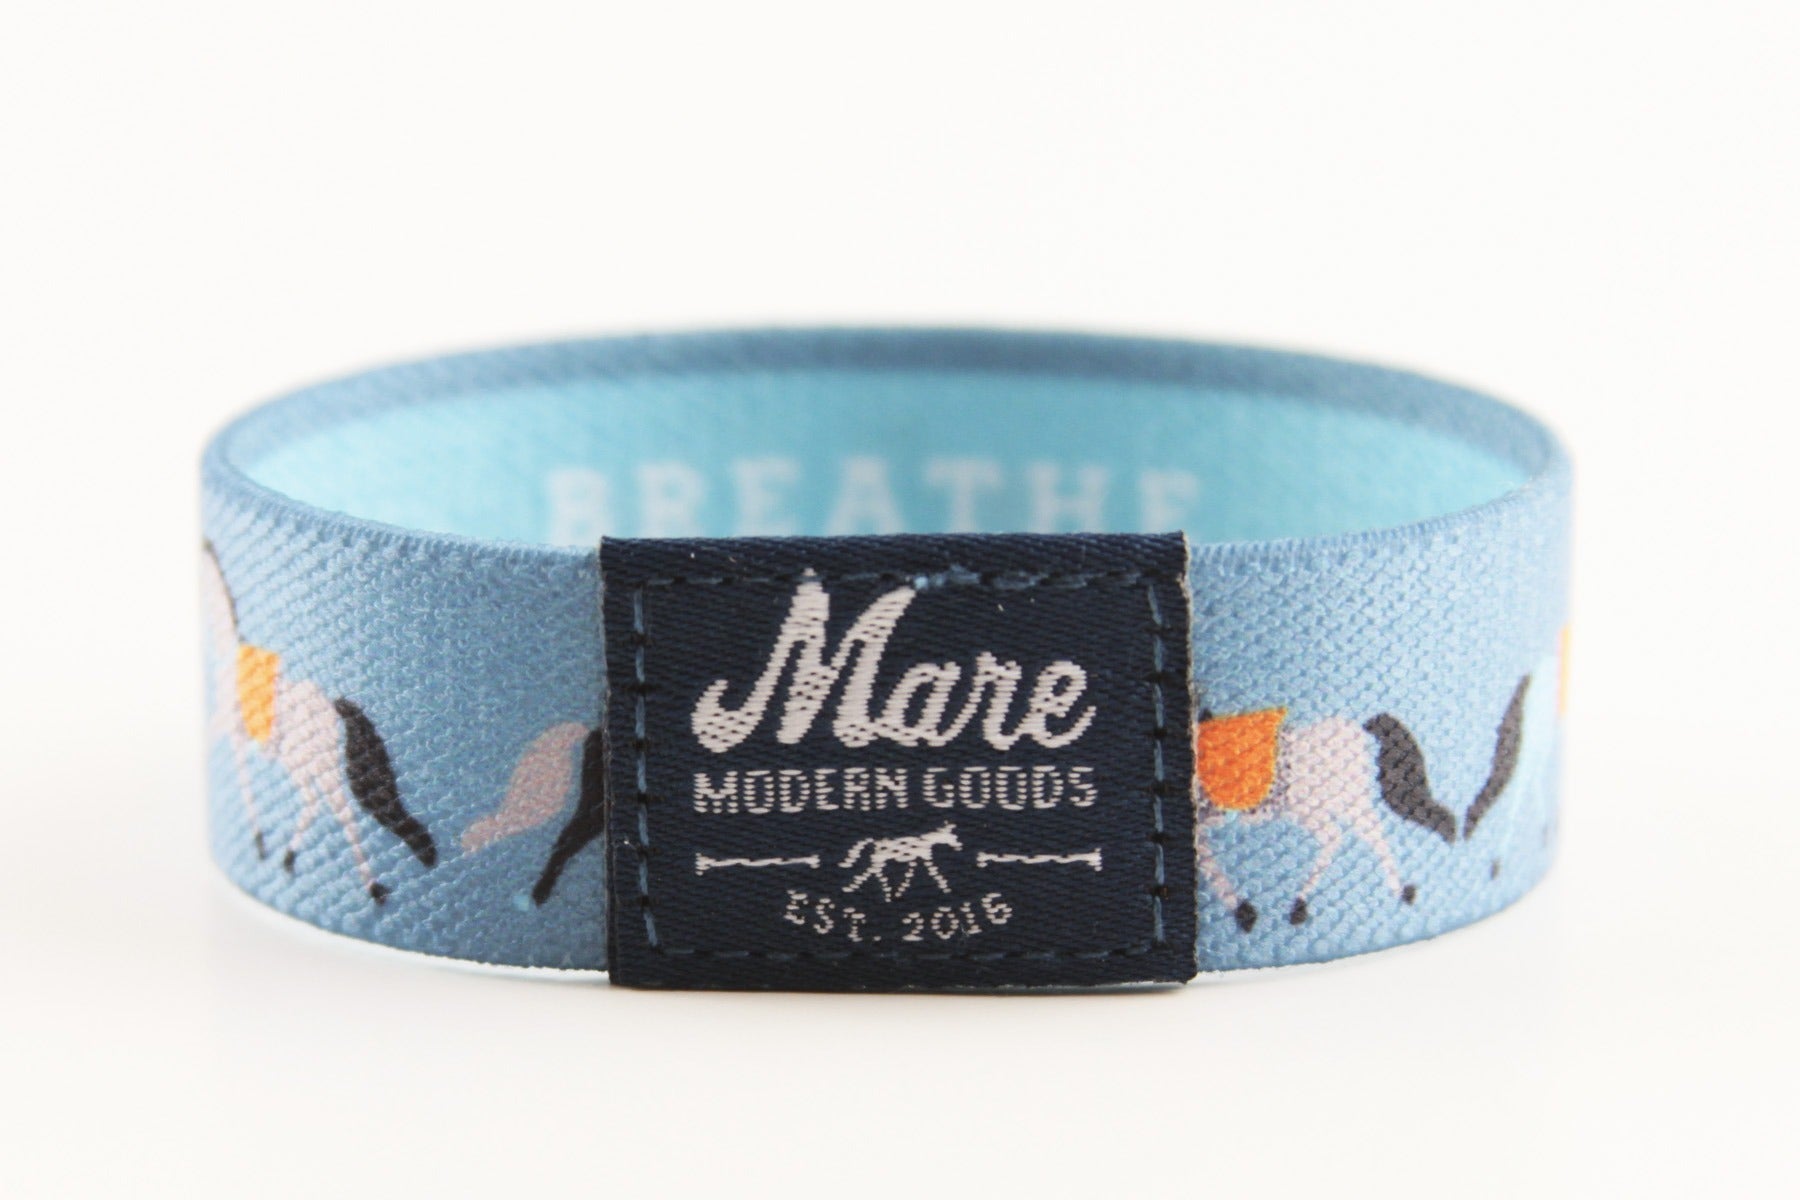 Mindfilly Bands-Mare Modern Goods